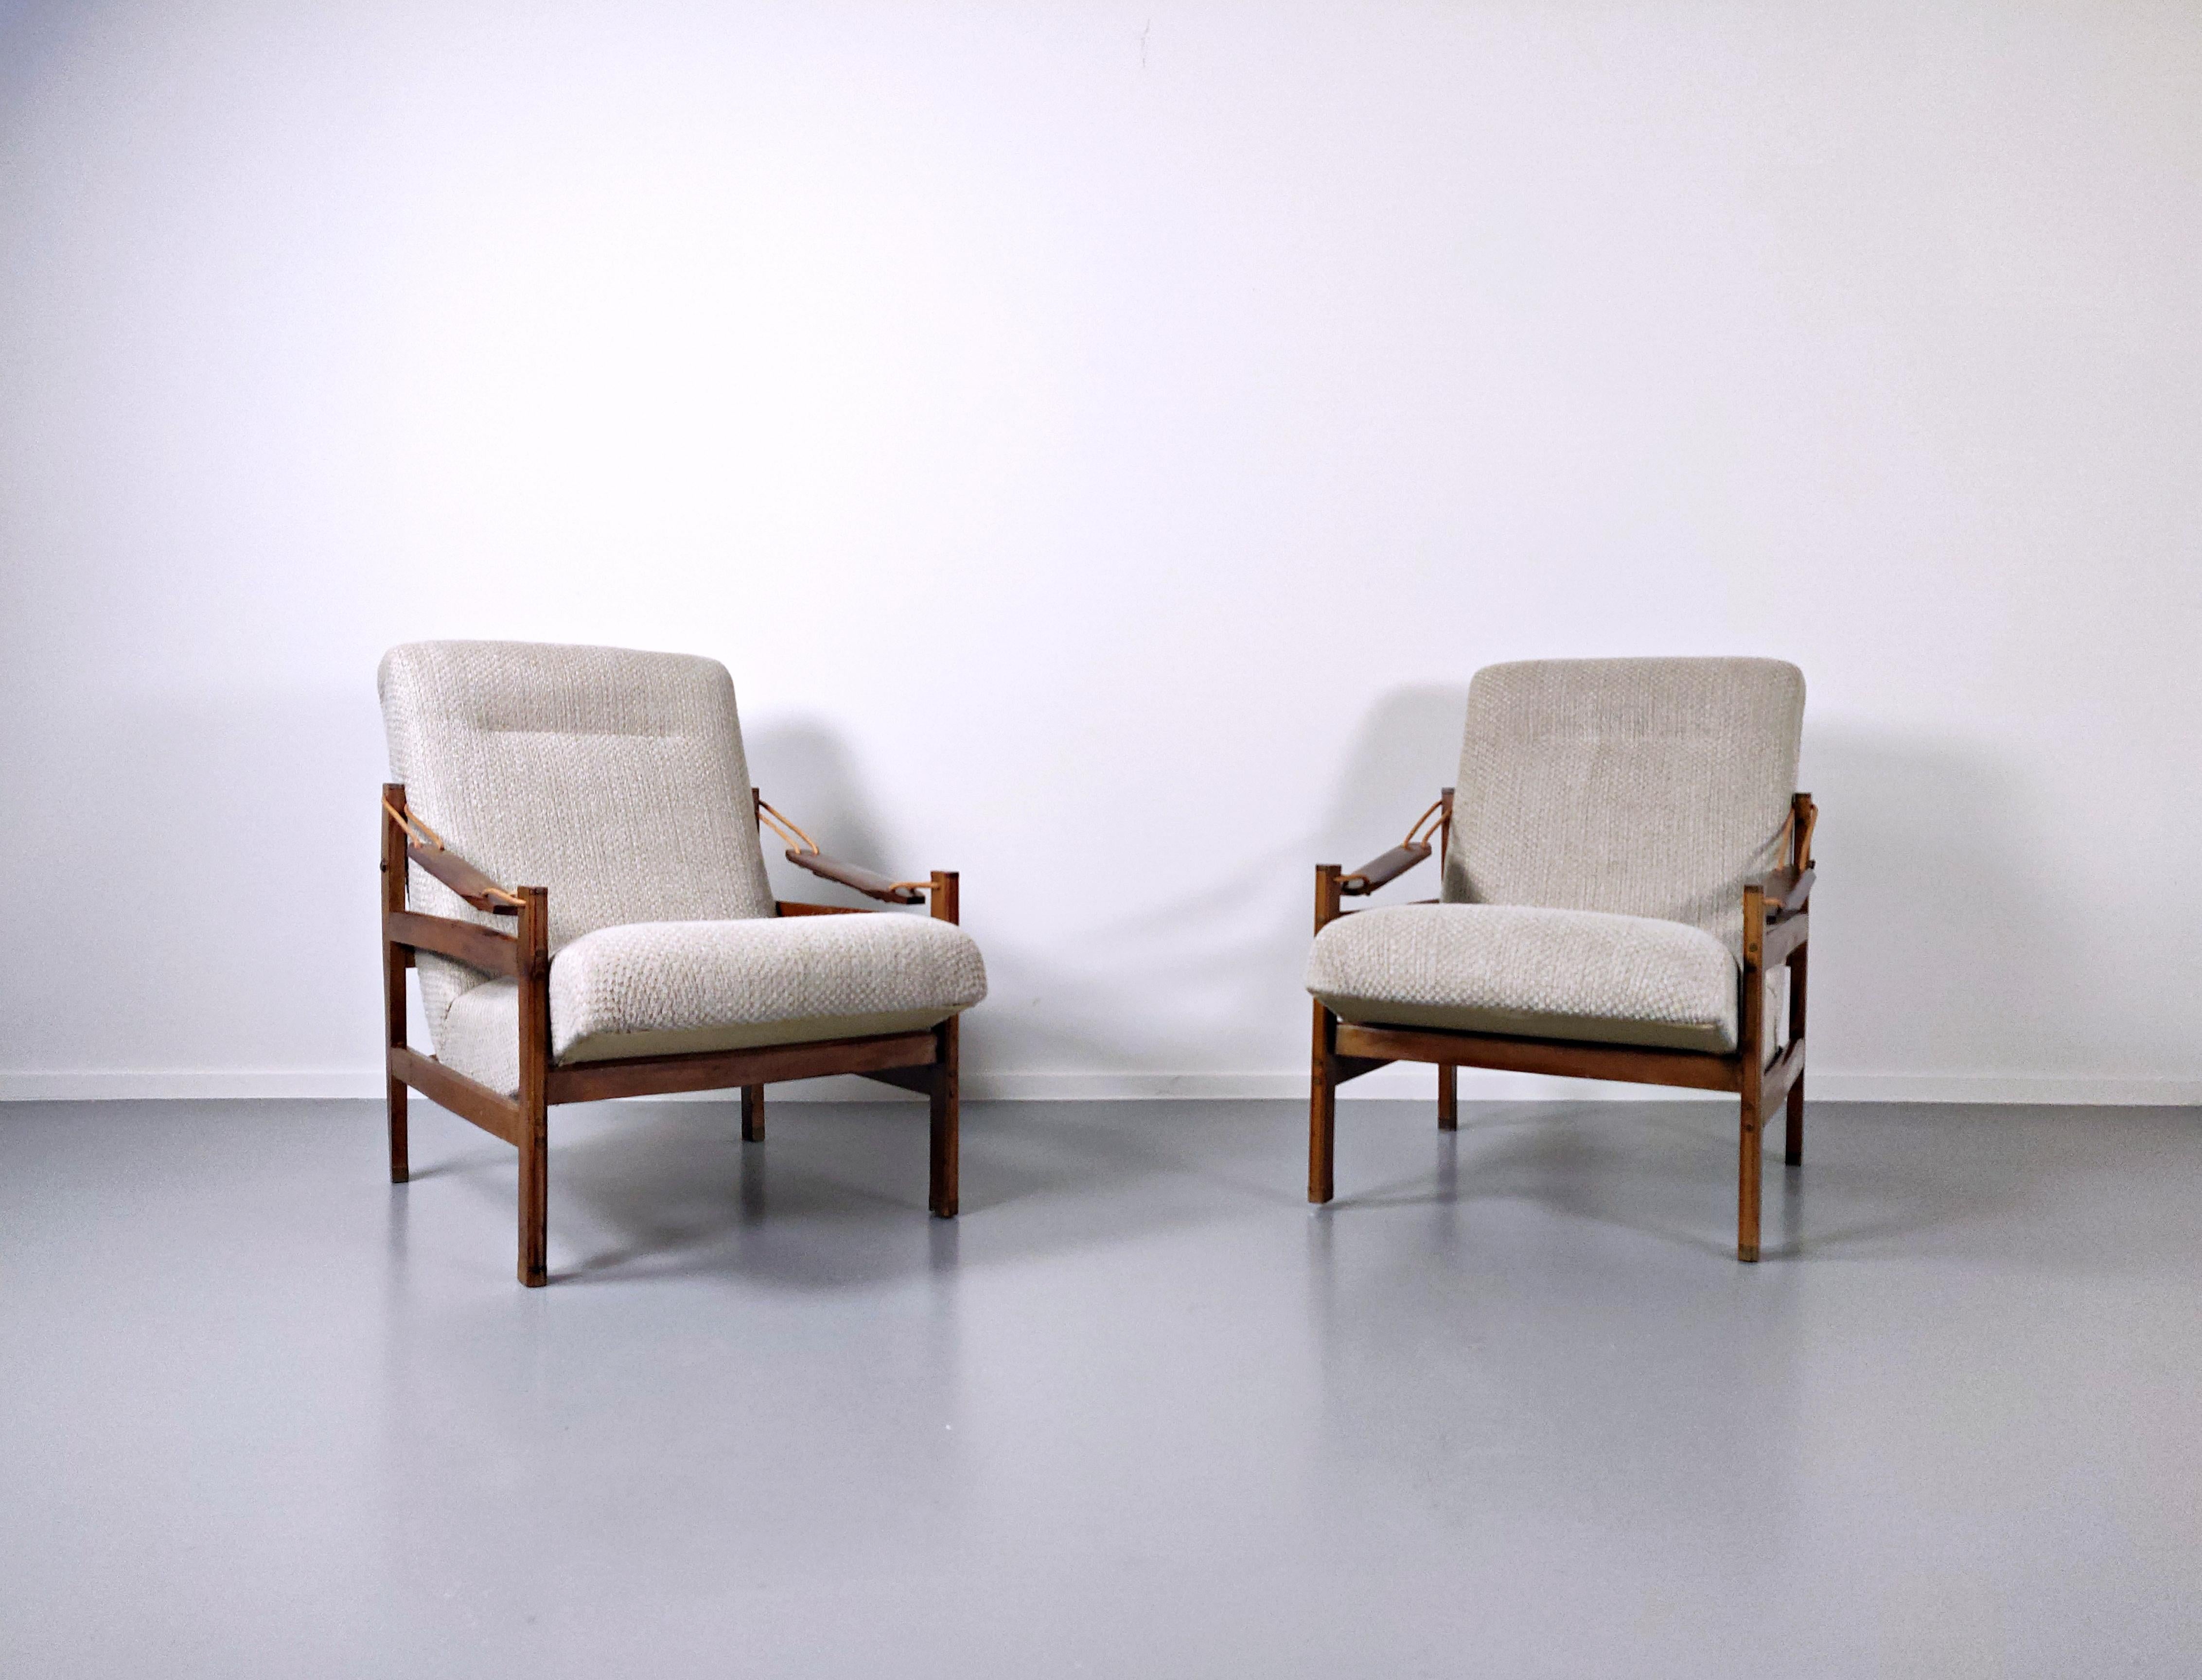 Pair of  Mid-Century Modern Brazilian armchairs in style of Sergio Rodrigues, 1960s.